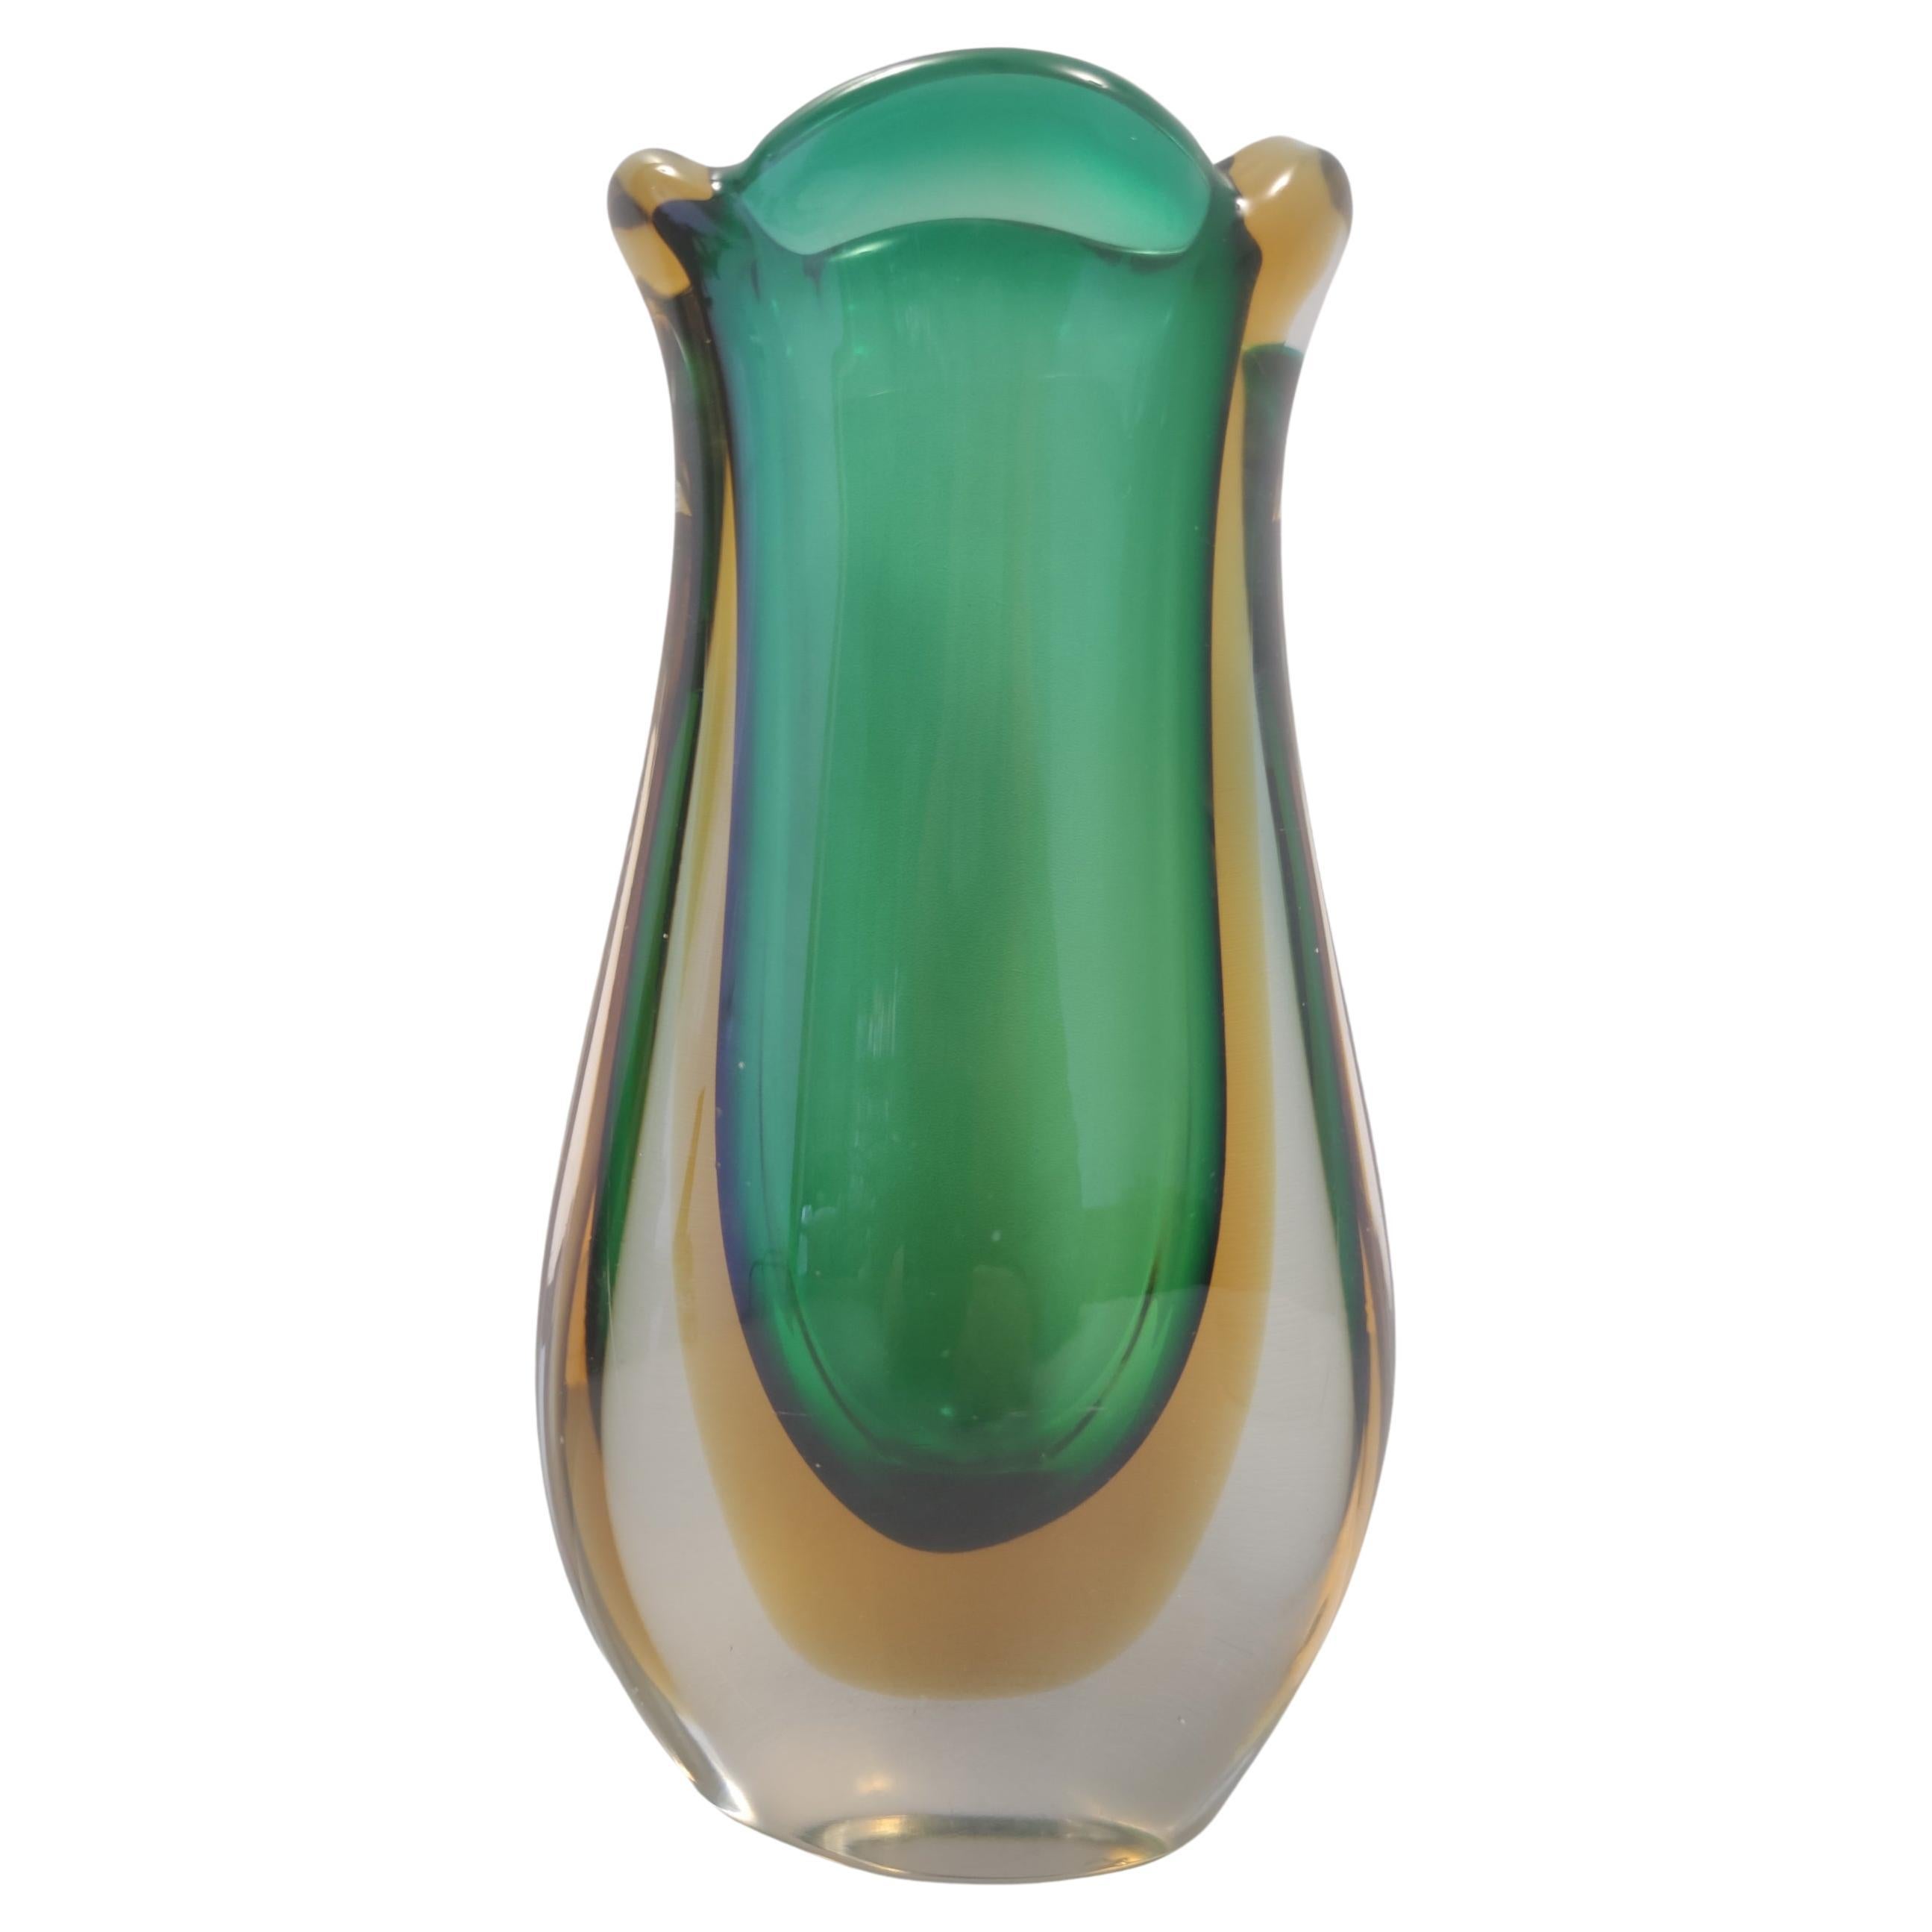 Vintage Green and Yellow  Sommerso Murano Glass Vase attr. to Flavio Poli, Italy